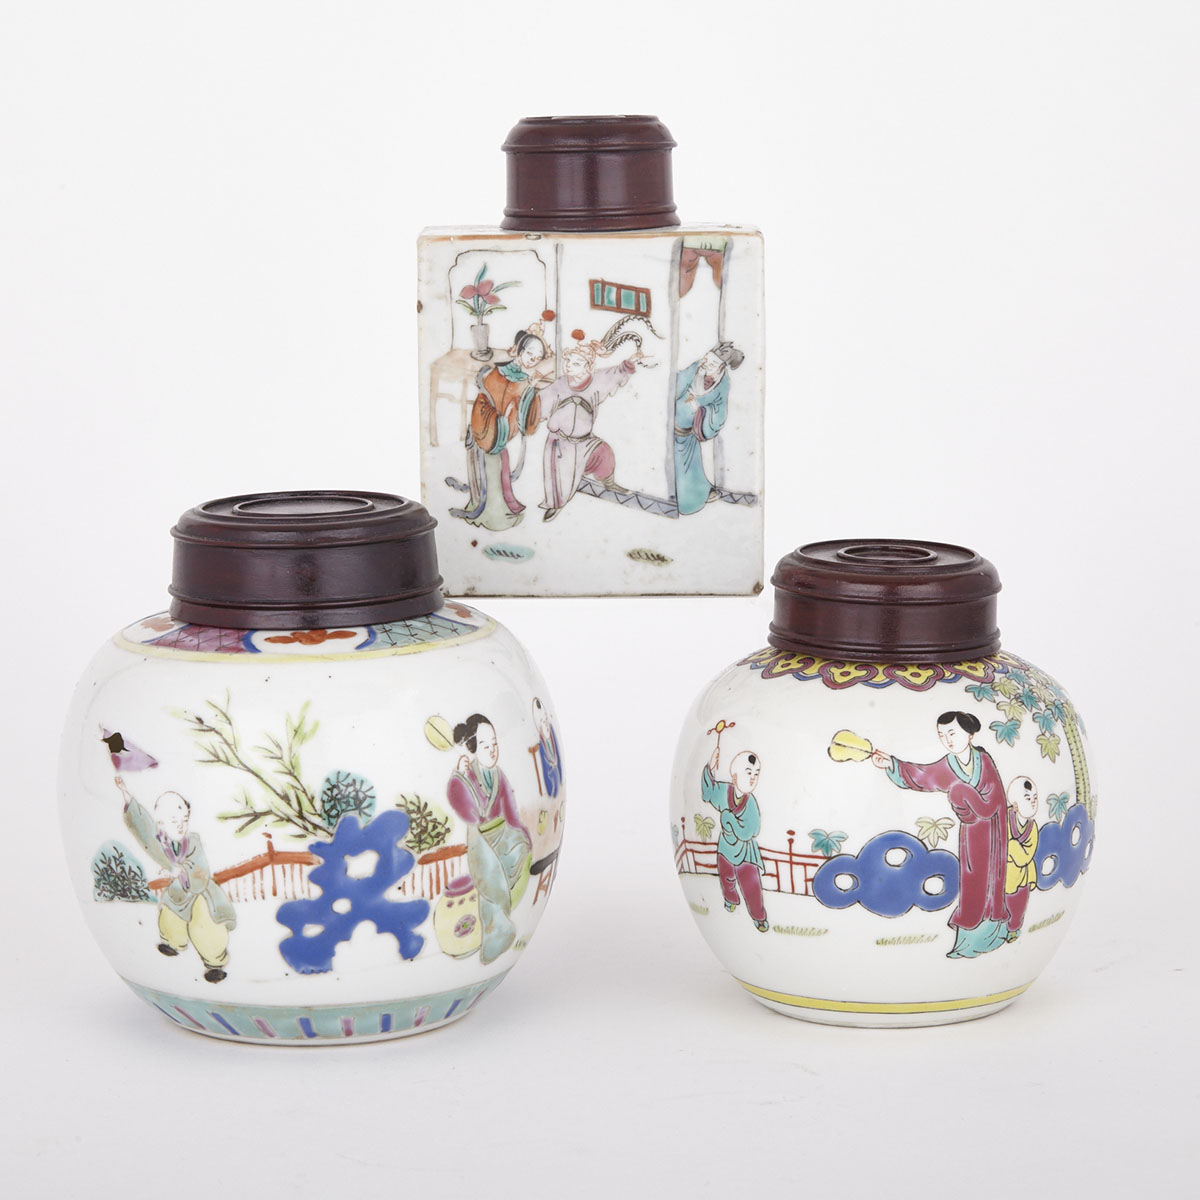 Two Famille Rose Covered Jars and One Tea Bottle, 18th Century 